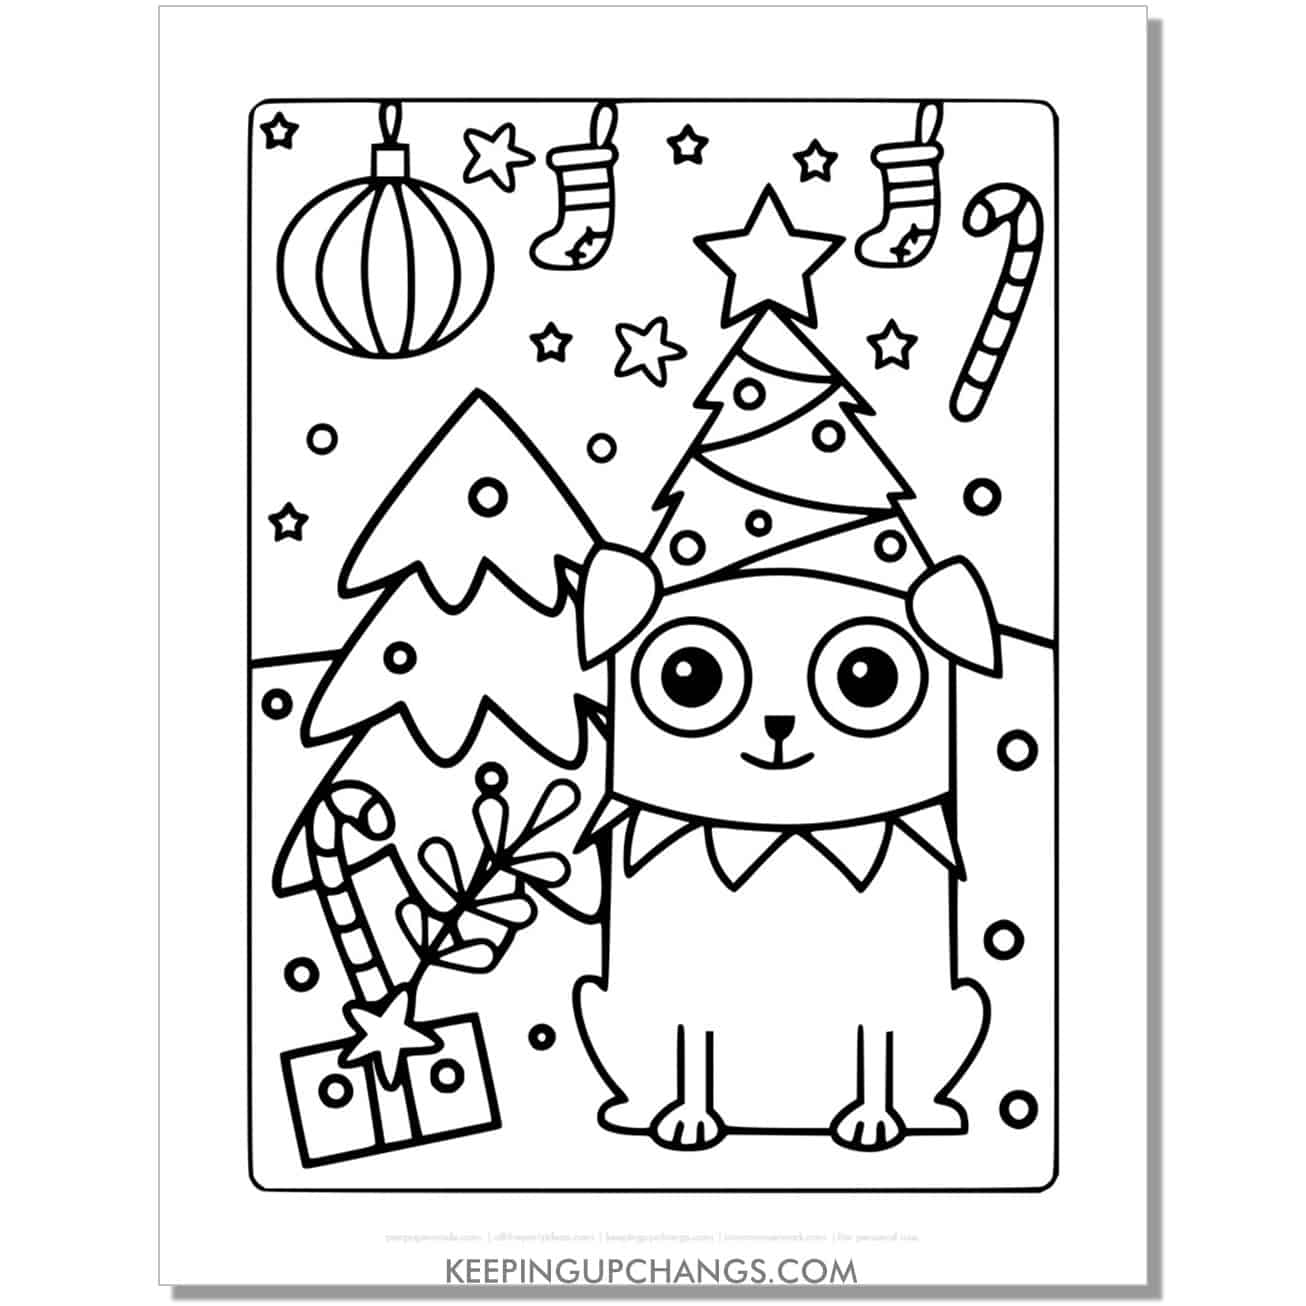 free full size christmas dog coloring page for kids with ornaments, candy canes, stockings, trees.